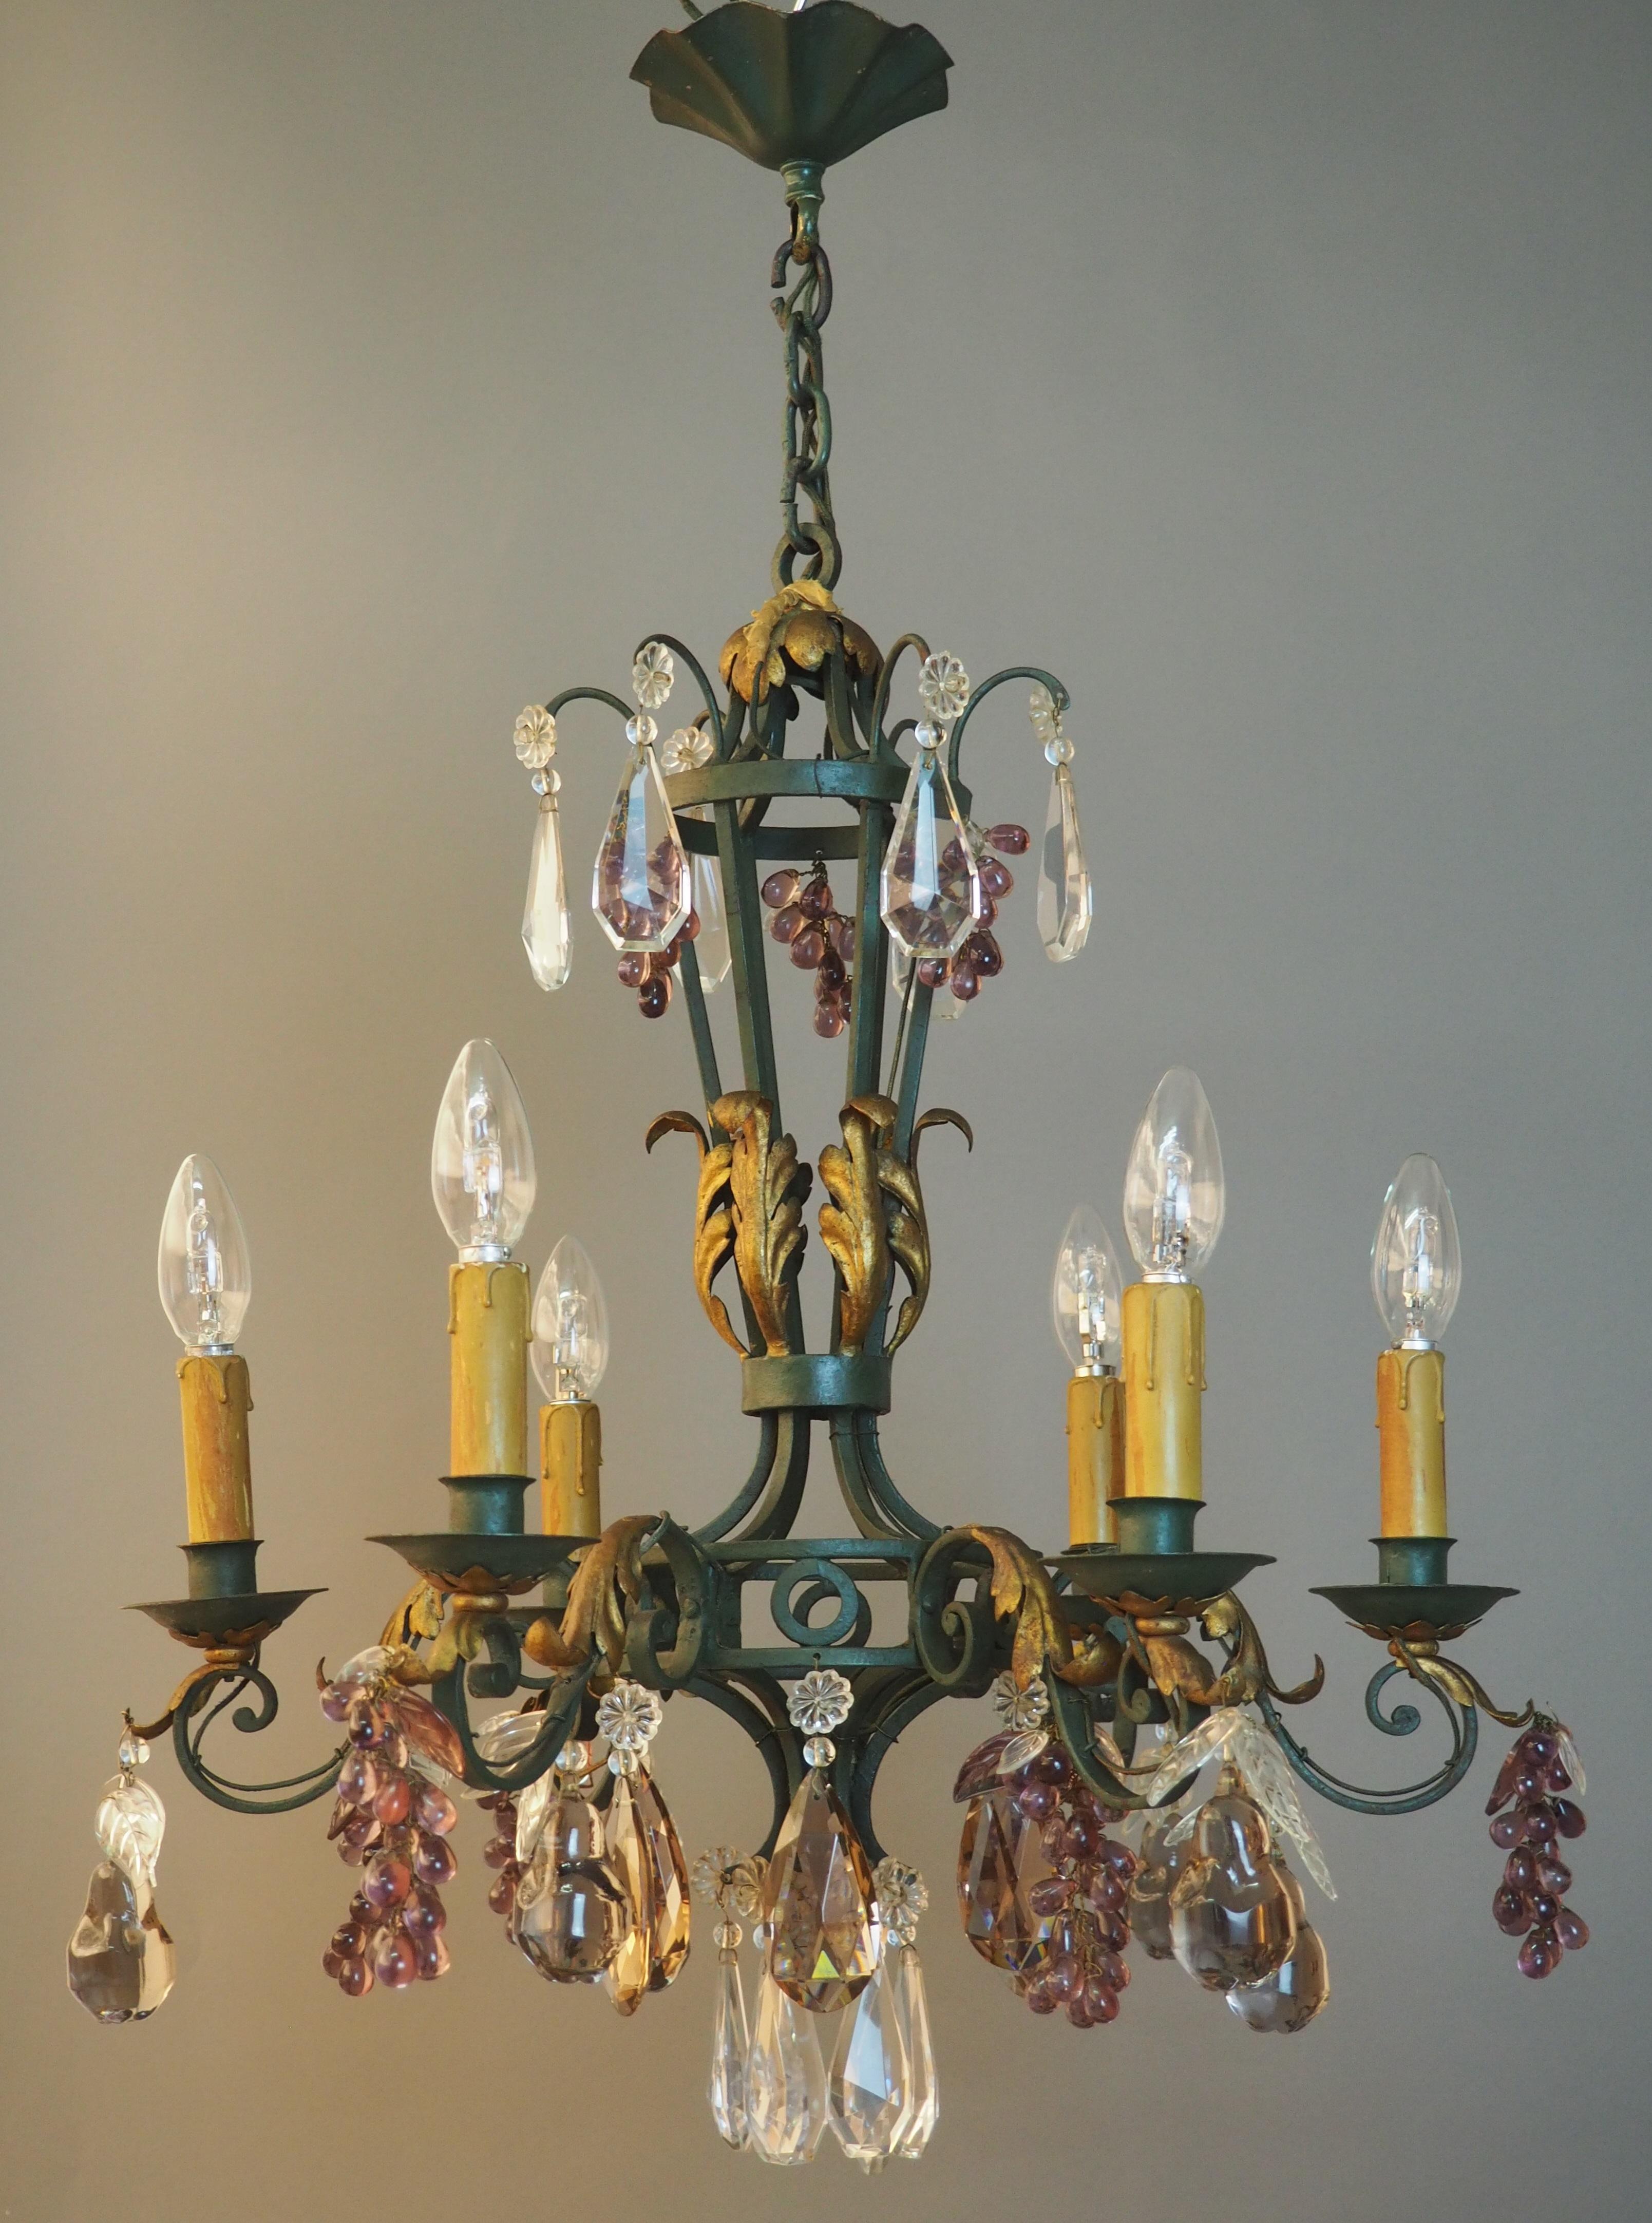 Green Painted and Gilt Wrought Iron Amethyst Chandelier with Fruits, 1900s For Sale 3